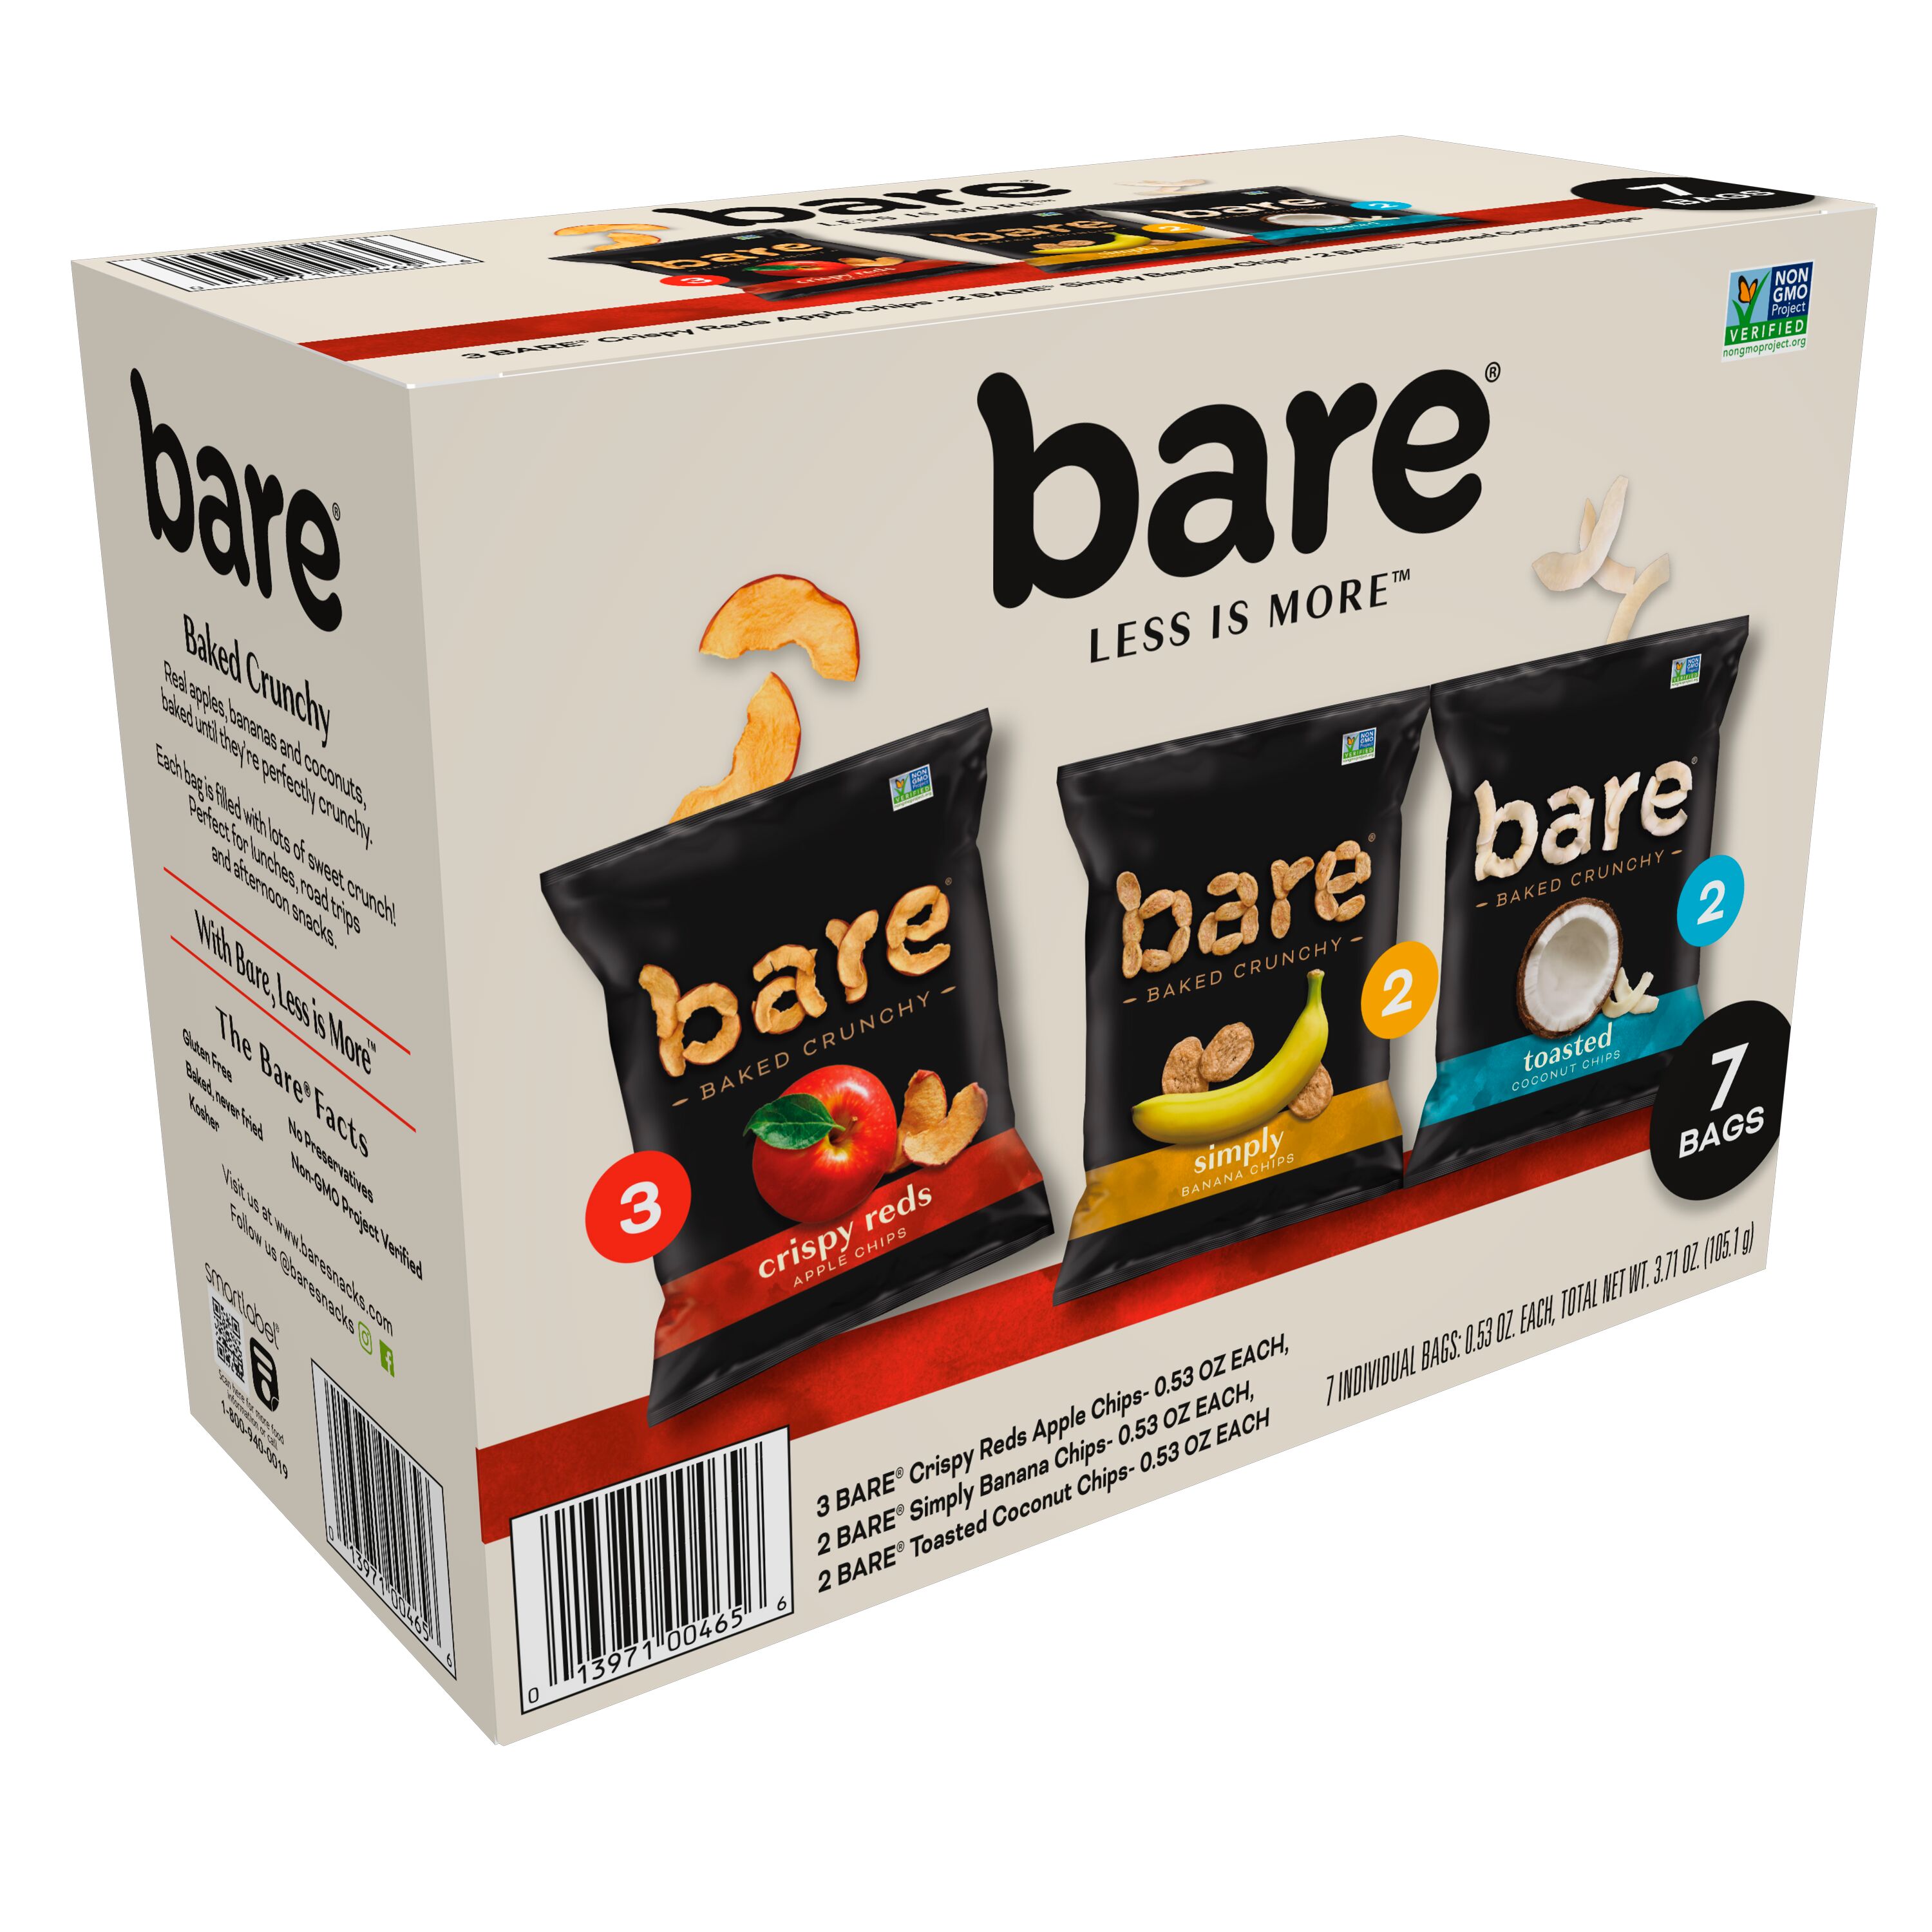 Bare, Baked Crunchy Fruit Chips Snack Pack, 0.53 oz Bags, 7 Count - image 2 of 12